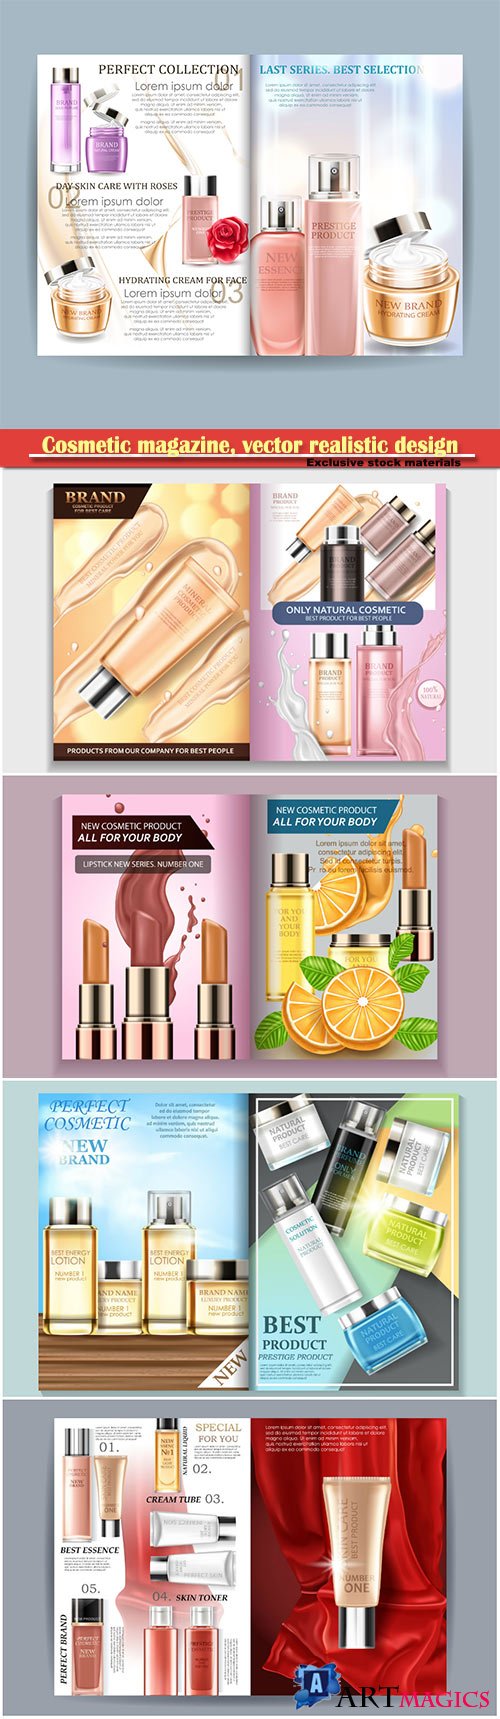 Cosmetic magazine, vector realistic design for your projects